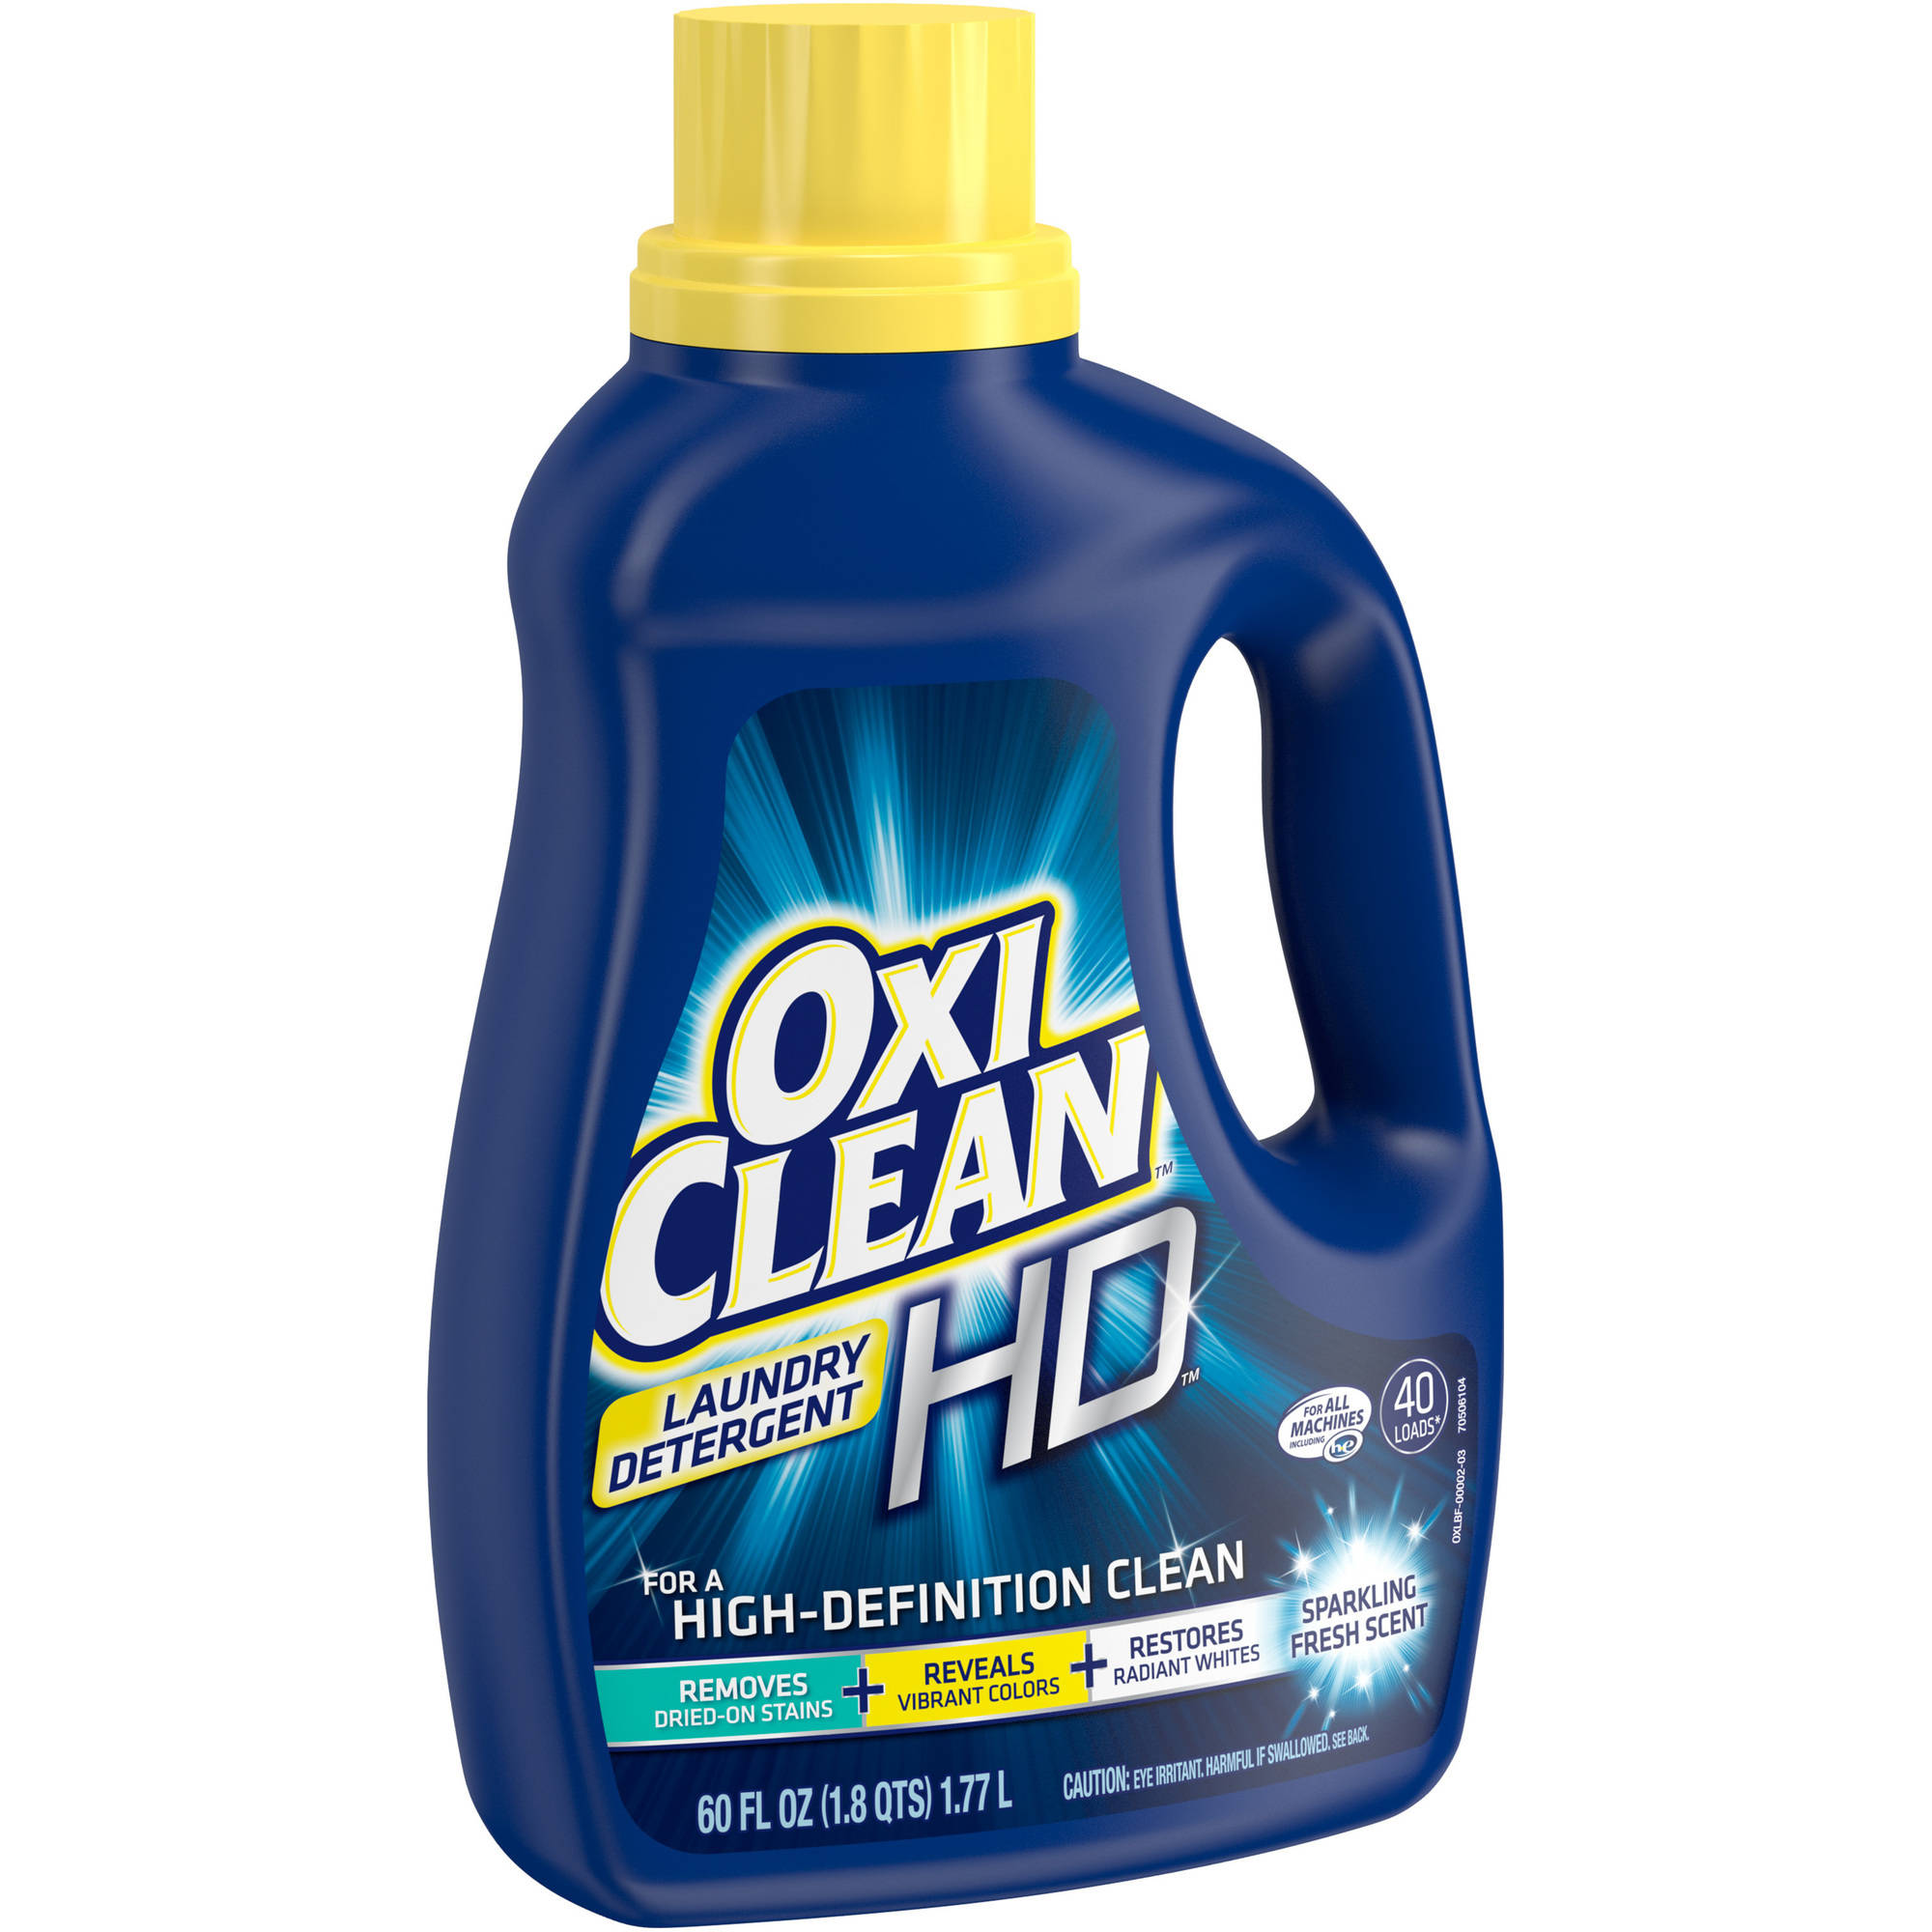 OxiClean Coupon, Only 2.99 for Laundry Detergent Super Safeway